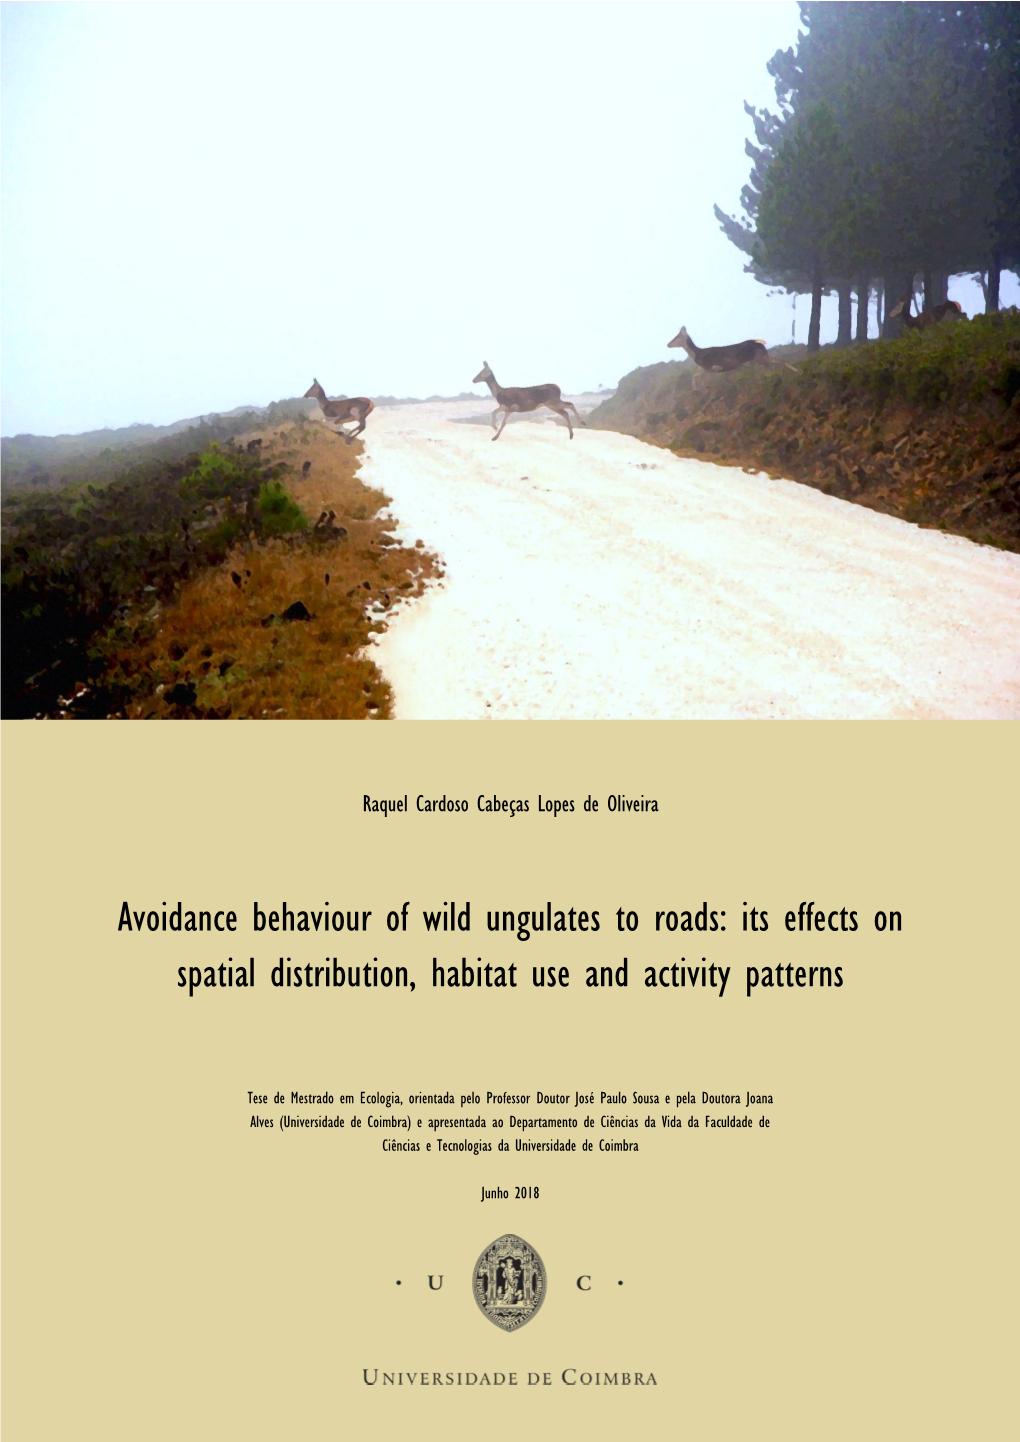 Avoidance Behaviour of Wild Ungulates to Roads: Its Effects on Spatial Distribution, Habitat Use and Activity Patterns